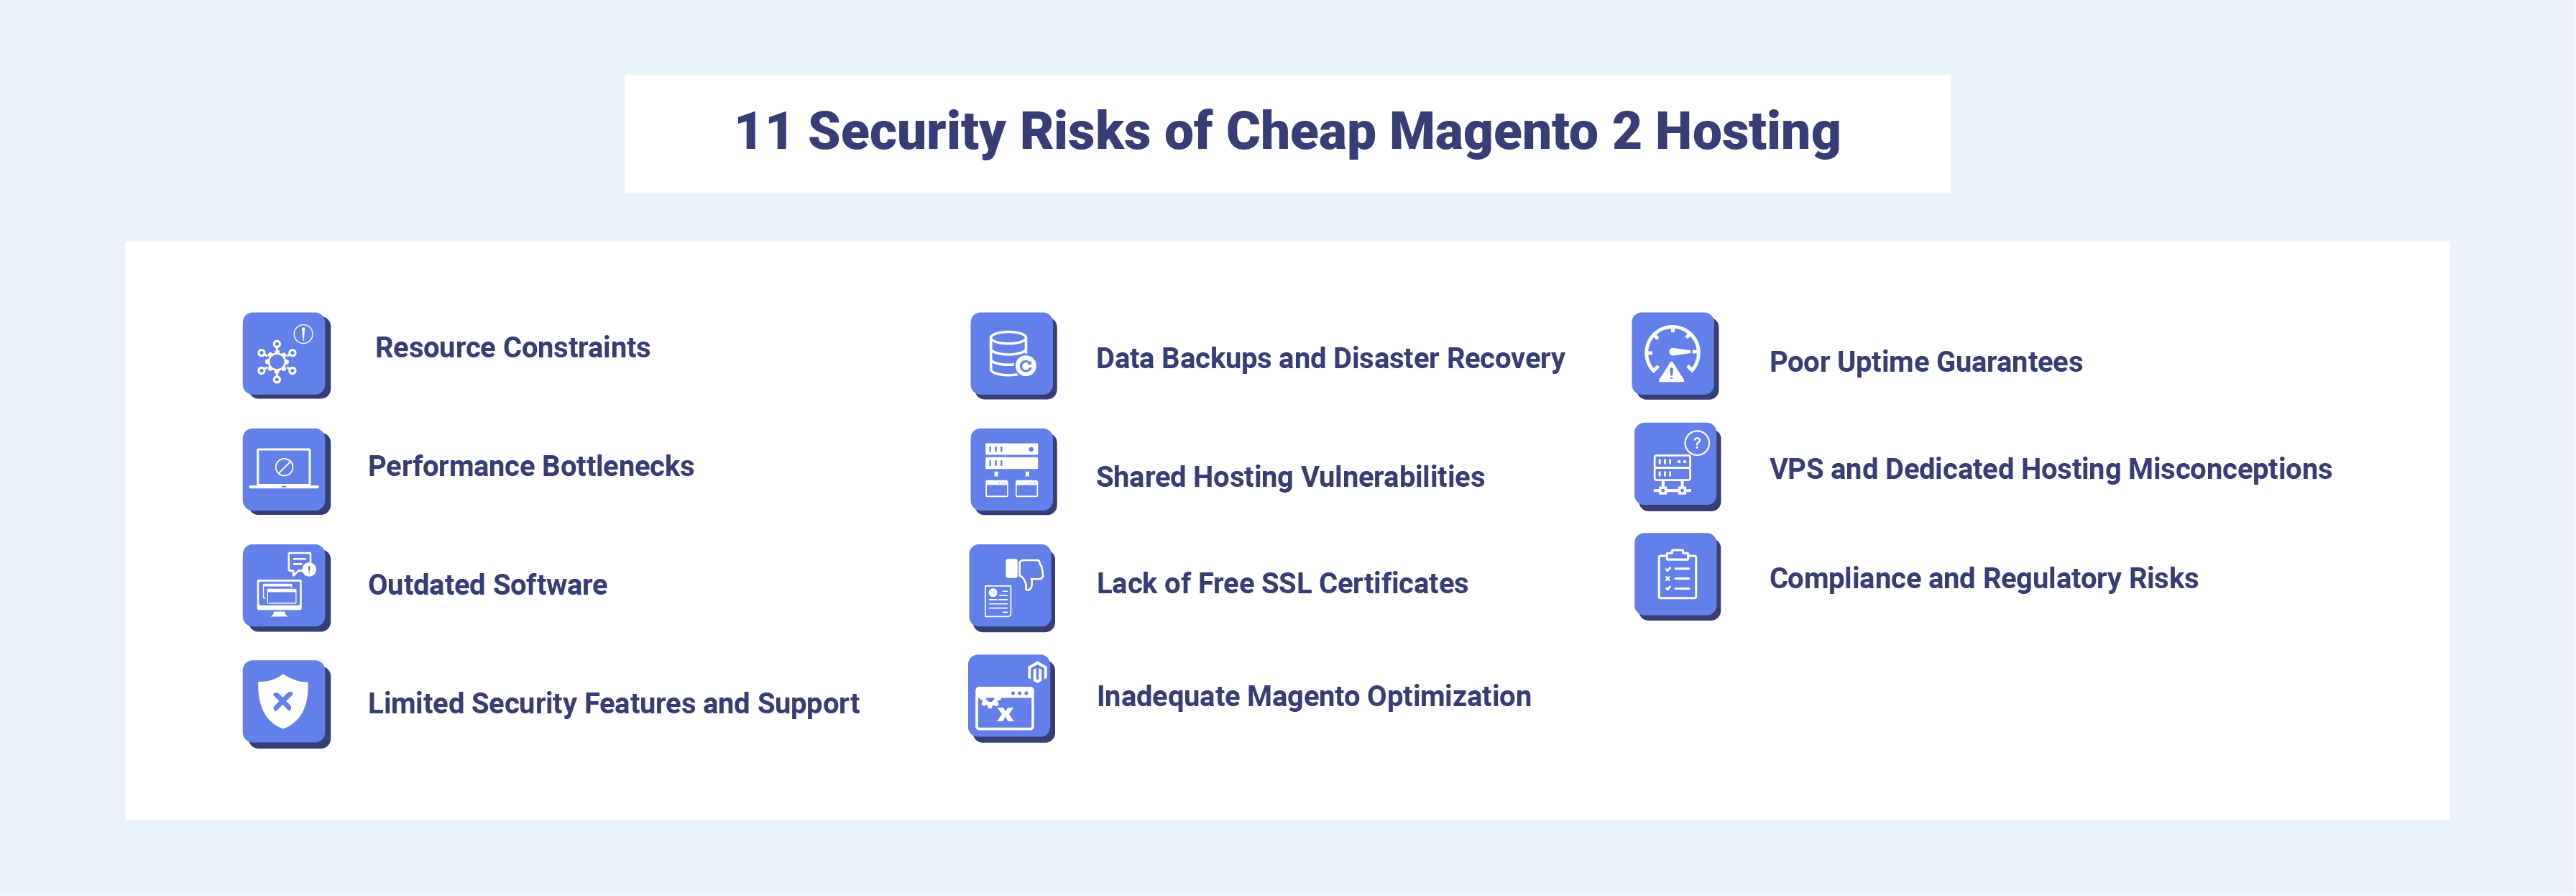 List of 11 security risks faced by Magento 2 stores using cheap hosting solutions.